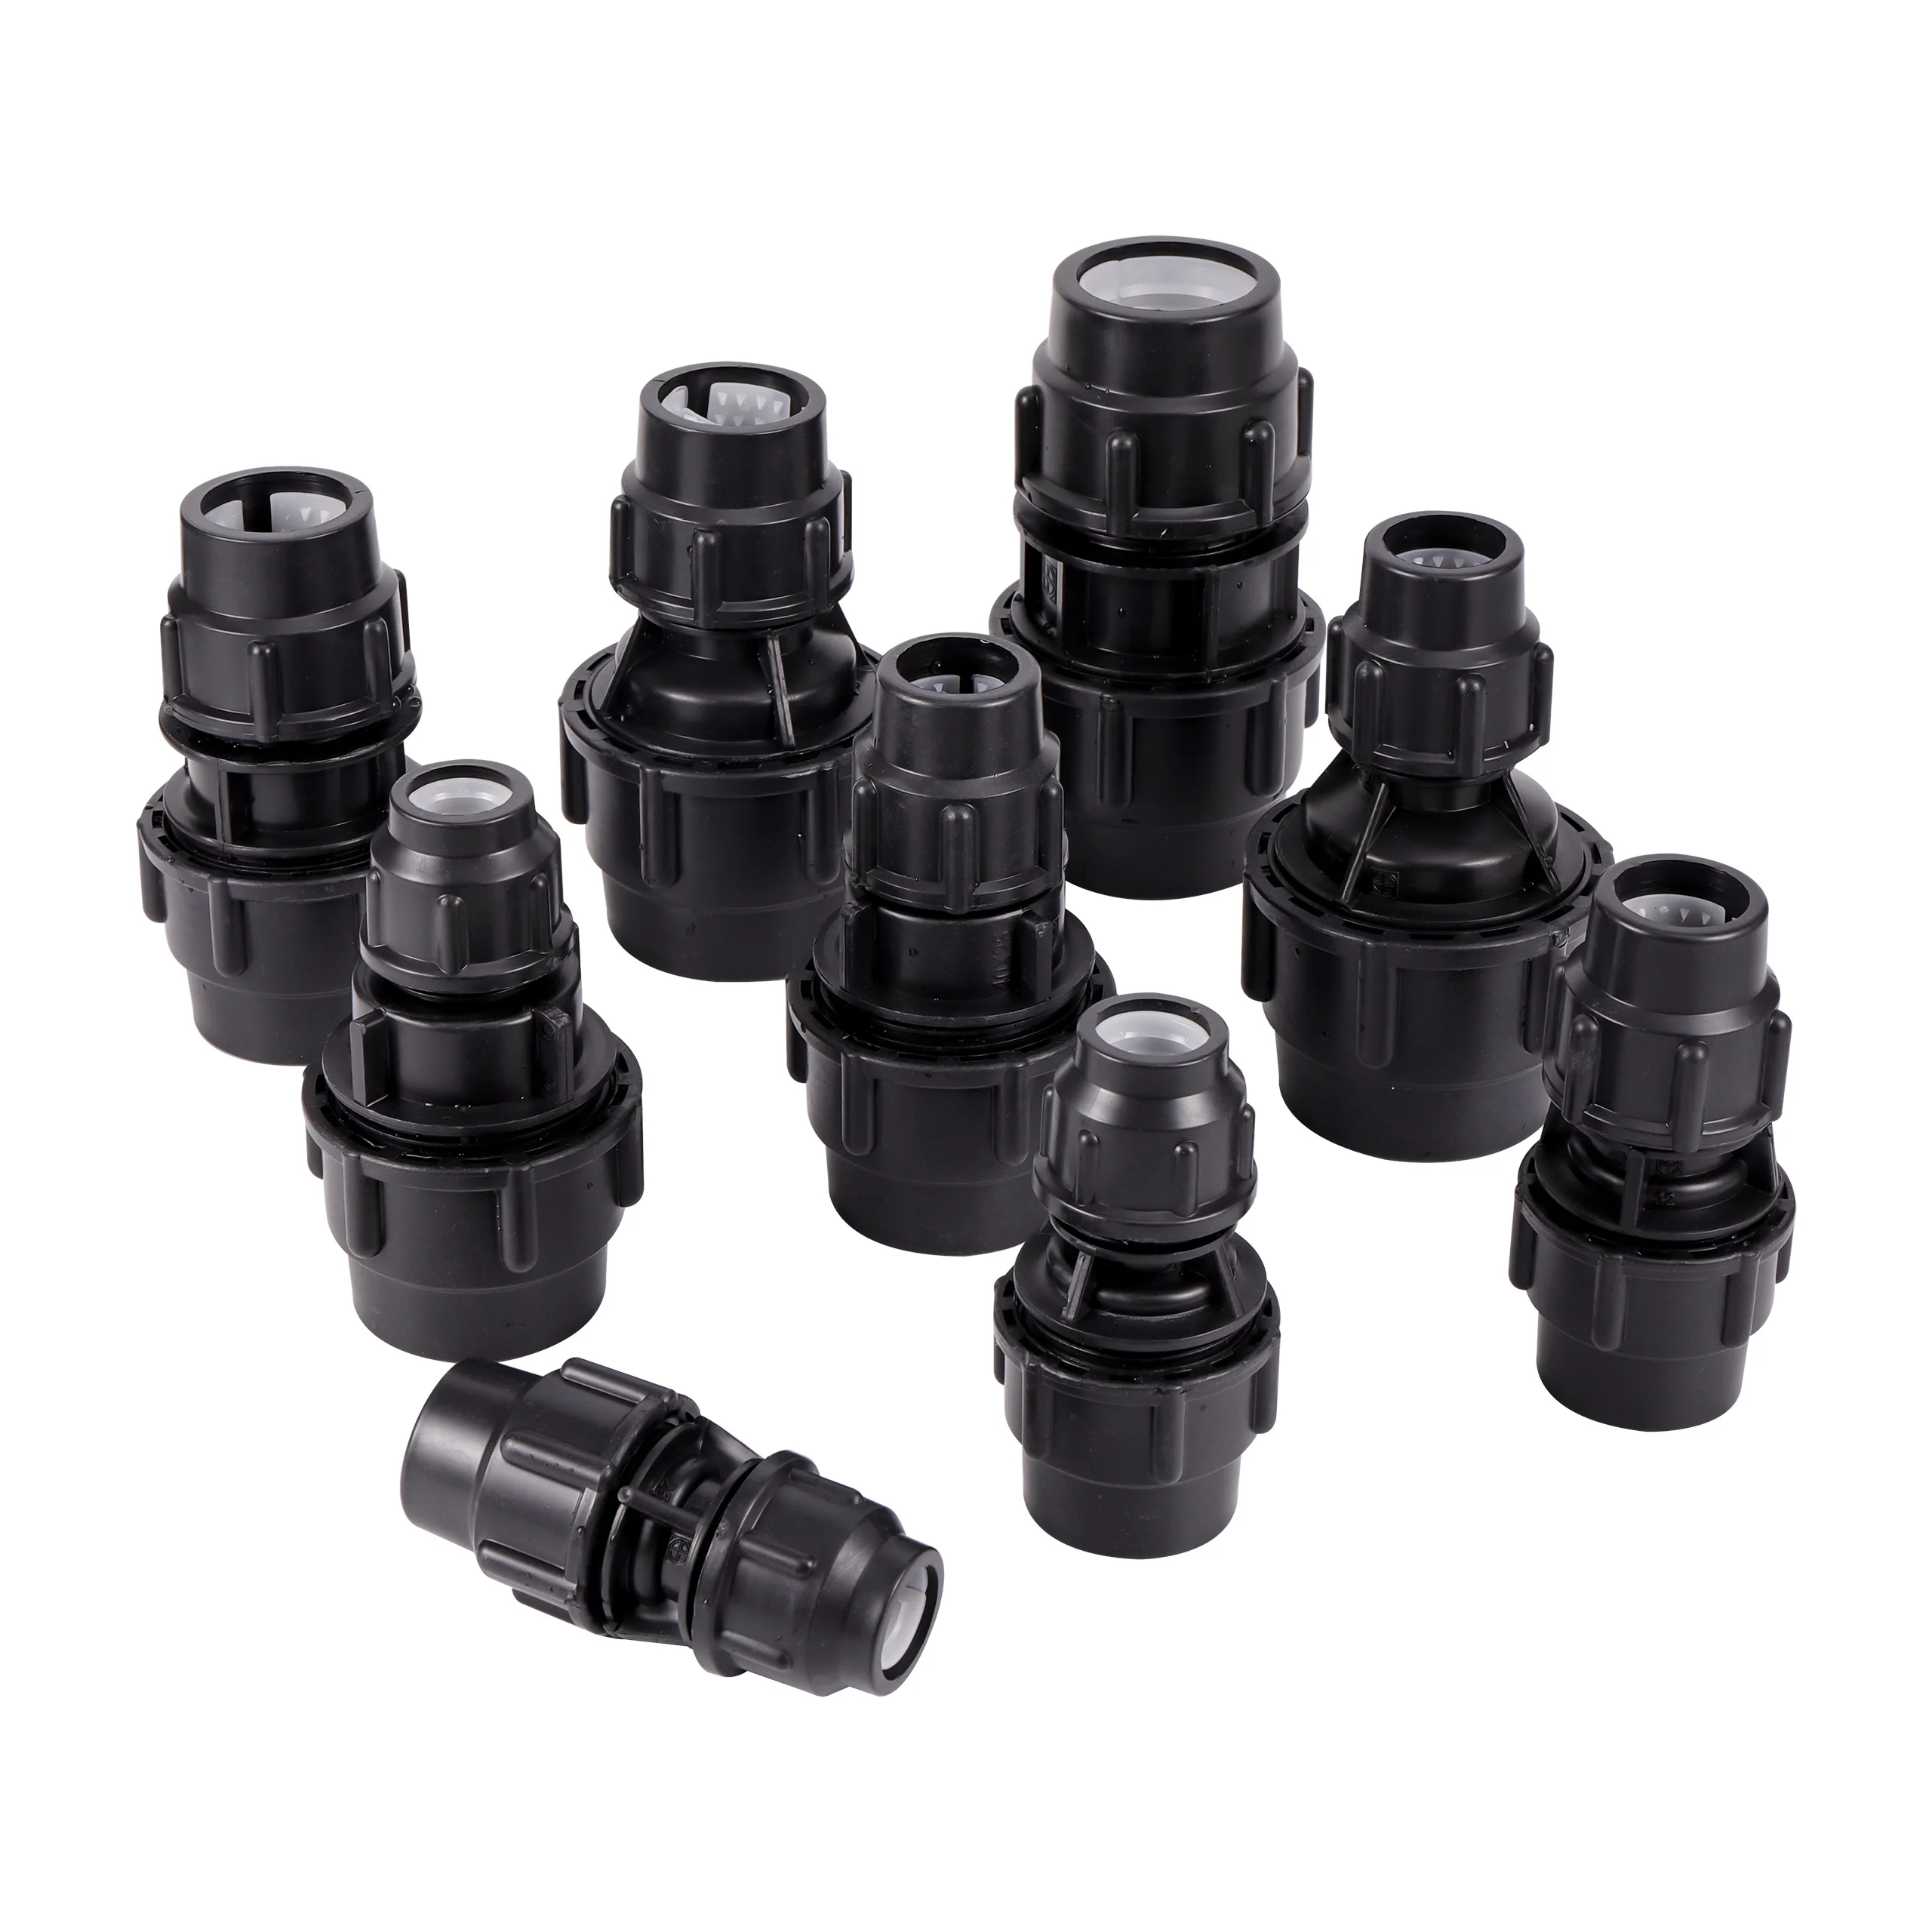 

1pc 20~50mm PE Quick Coupling Garden Direct Connection Water Pipe Connectors Agricultural Irrigation System Plastic Tube Fitting